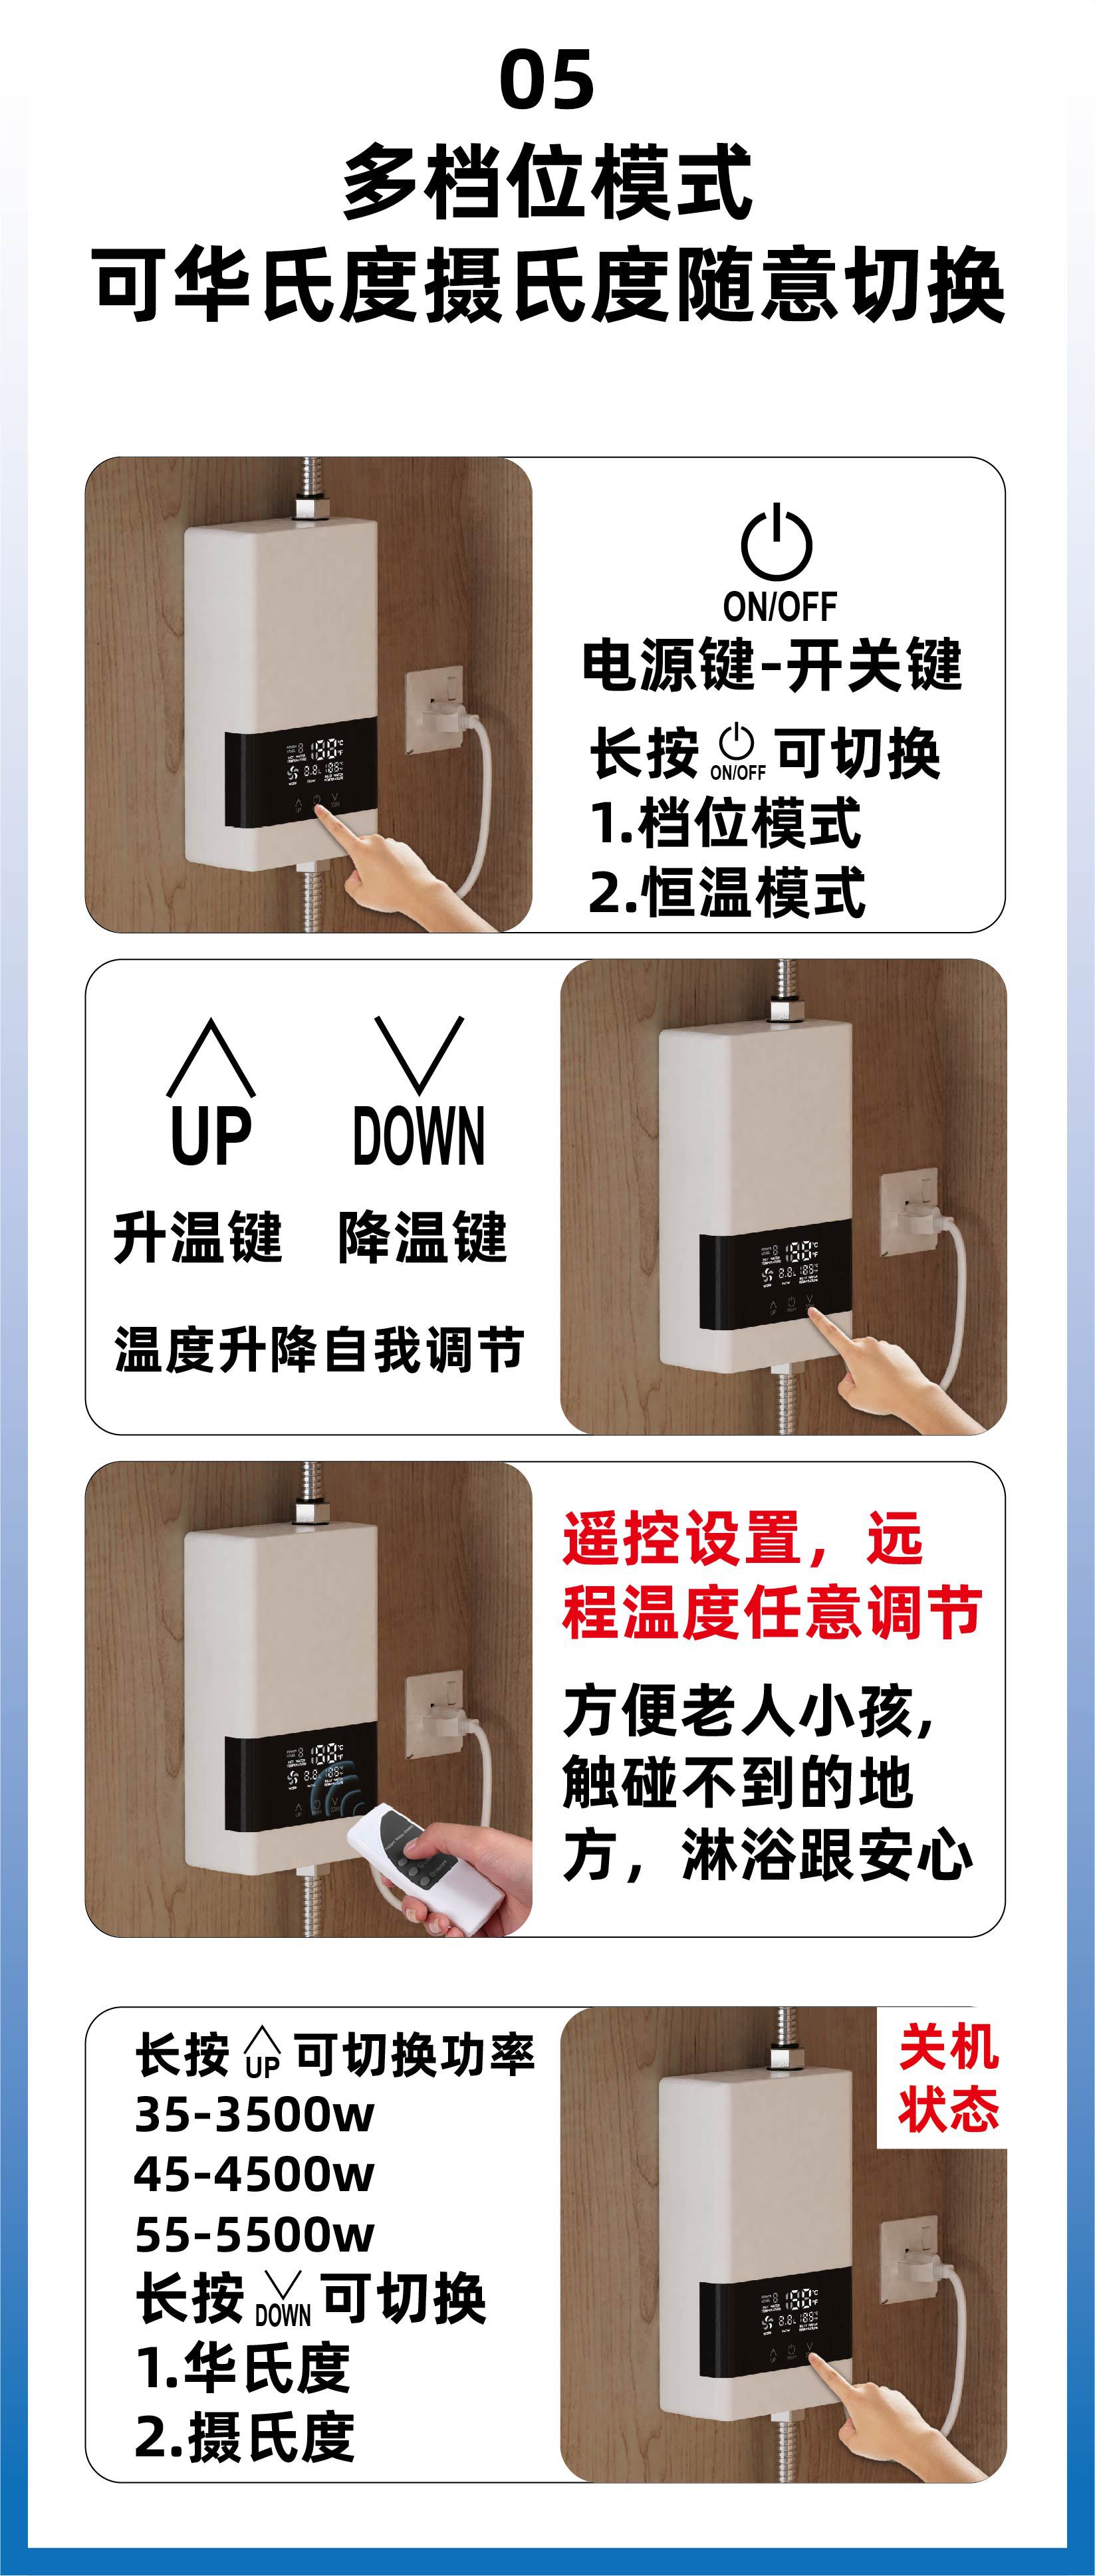 Instantaneous Water Heater For Household Quick-heating Kitchen, Kitchen Shower, Small Constant Temperature 110V